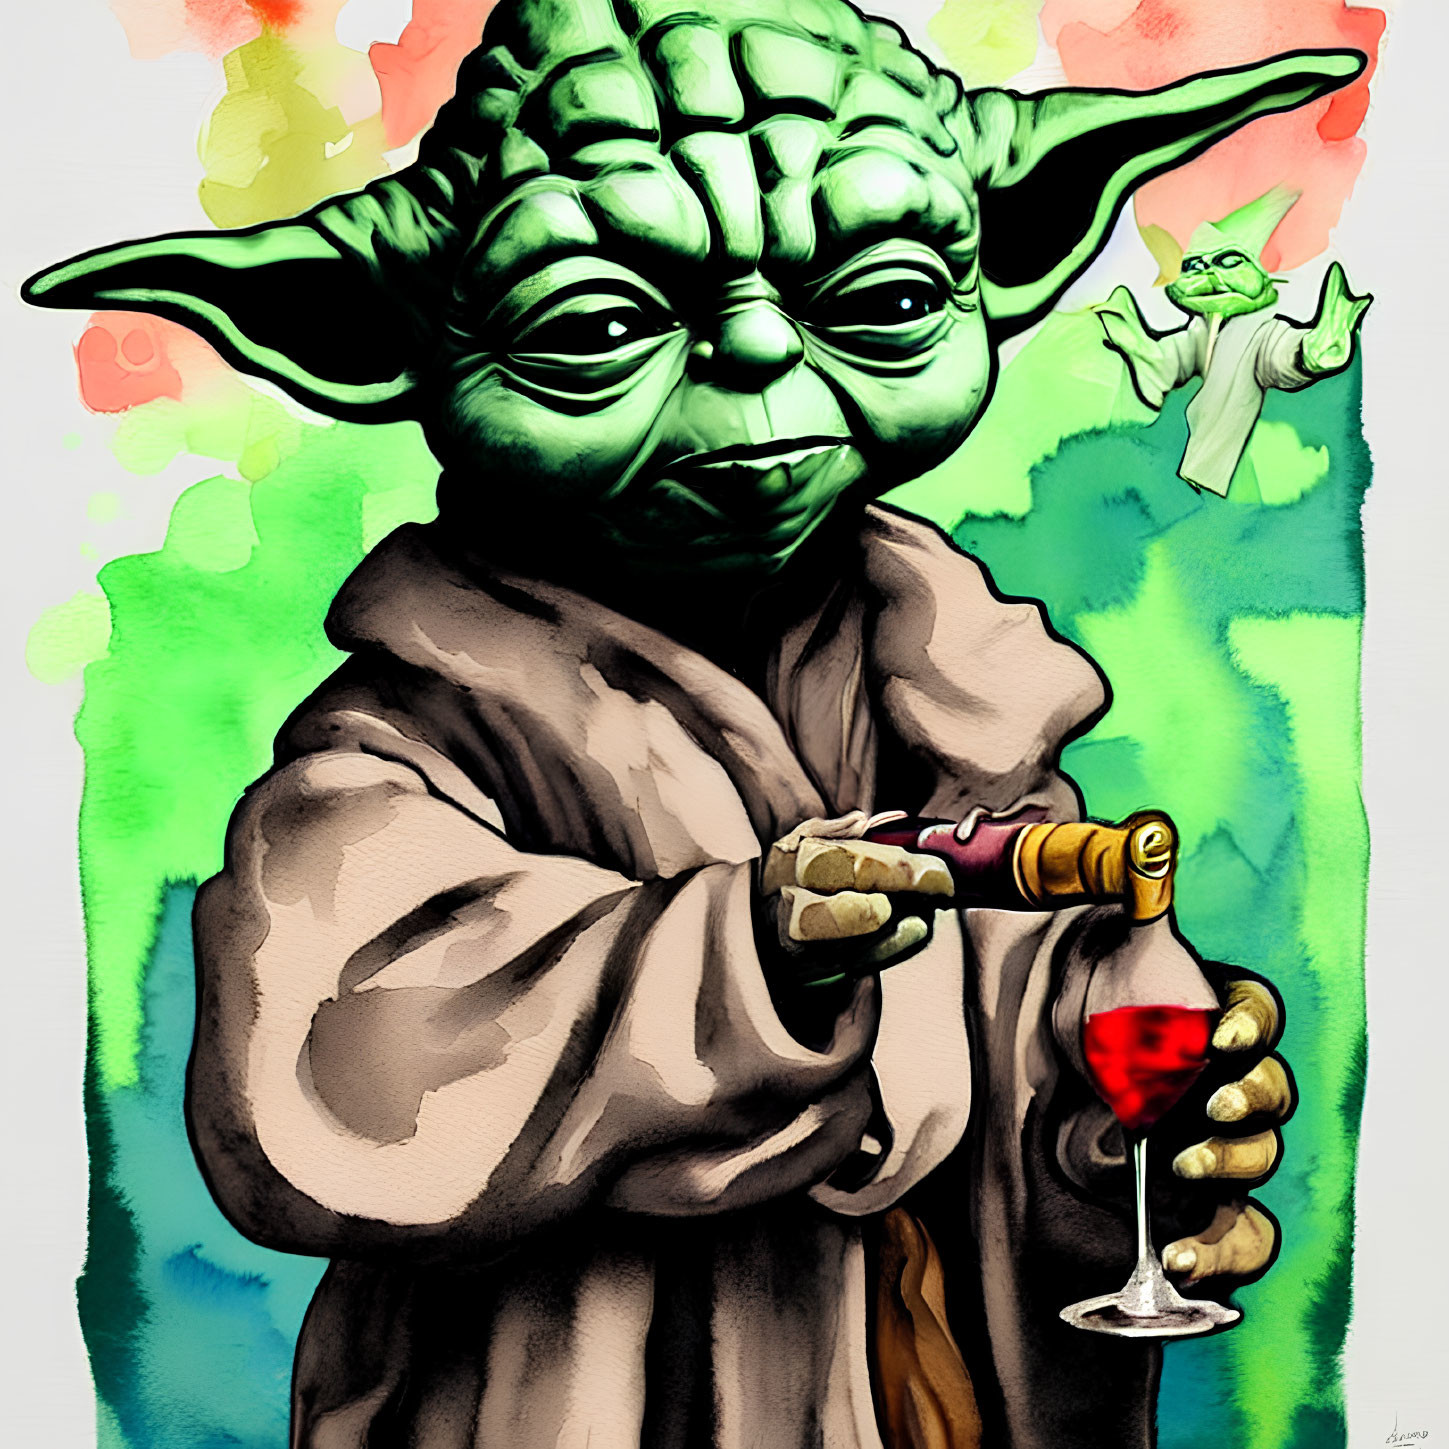 Colorful Yoda illustration with lightsaber and red liquid.